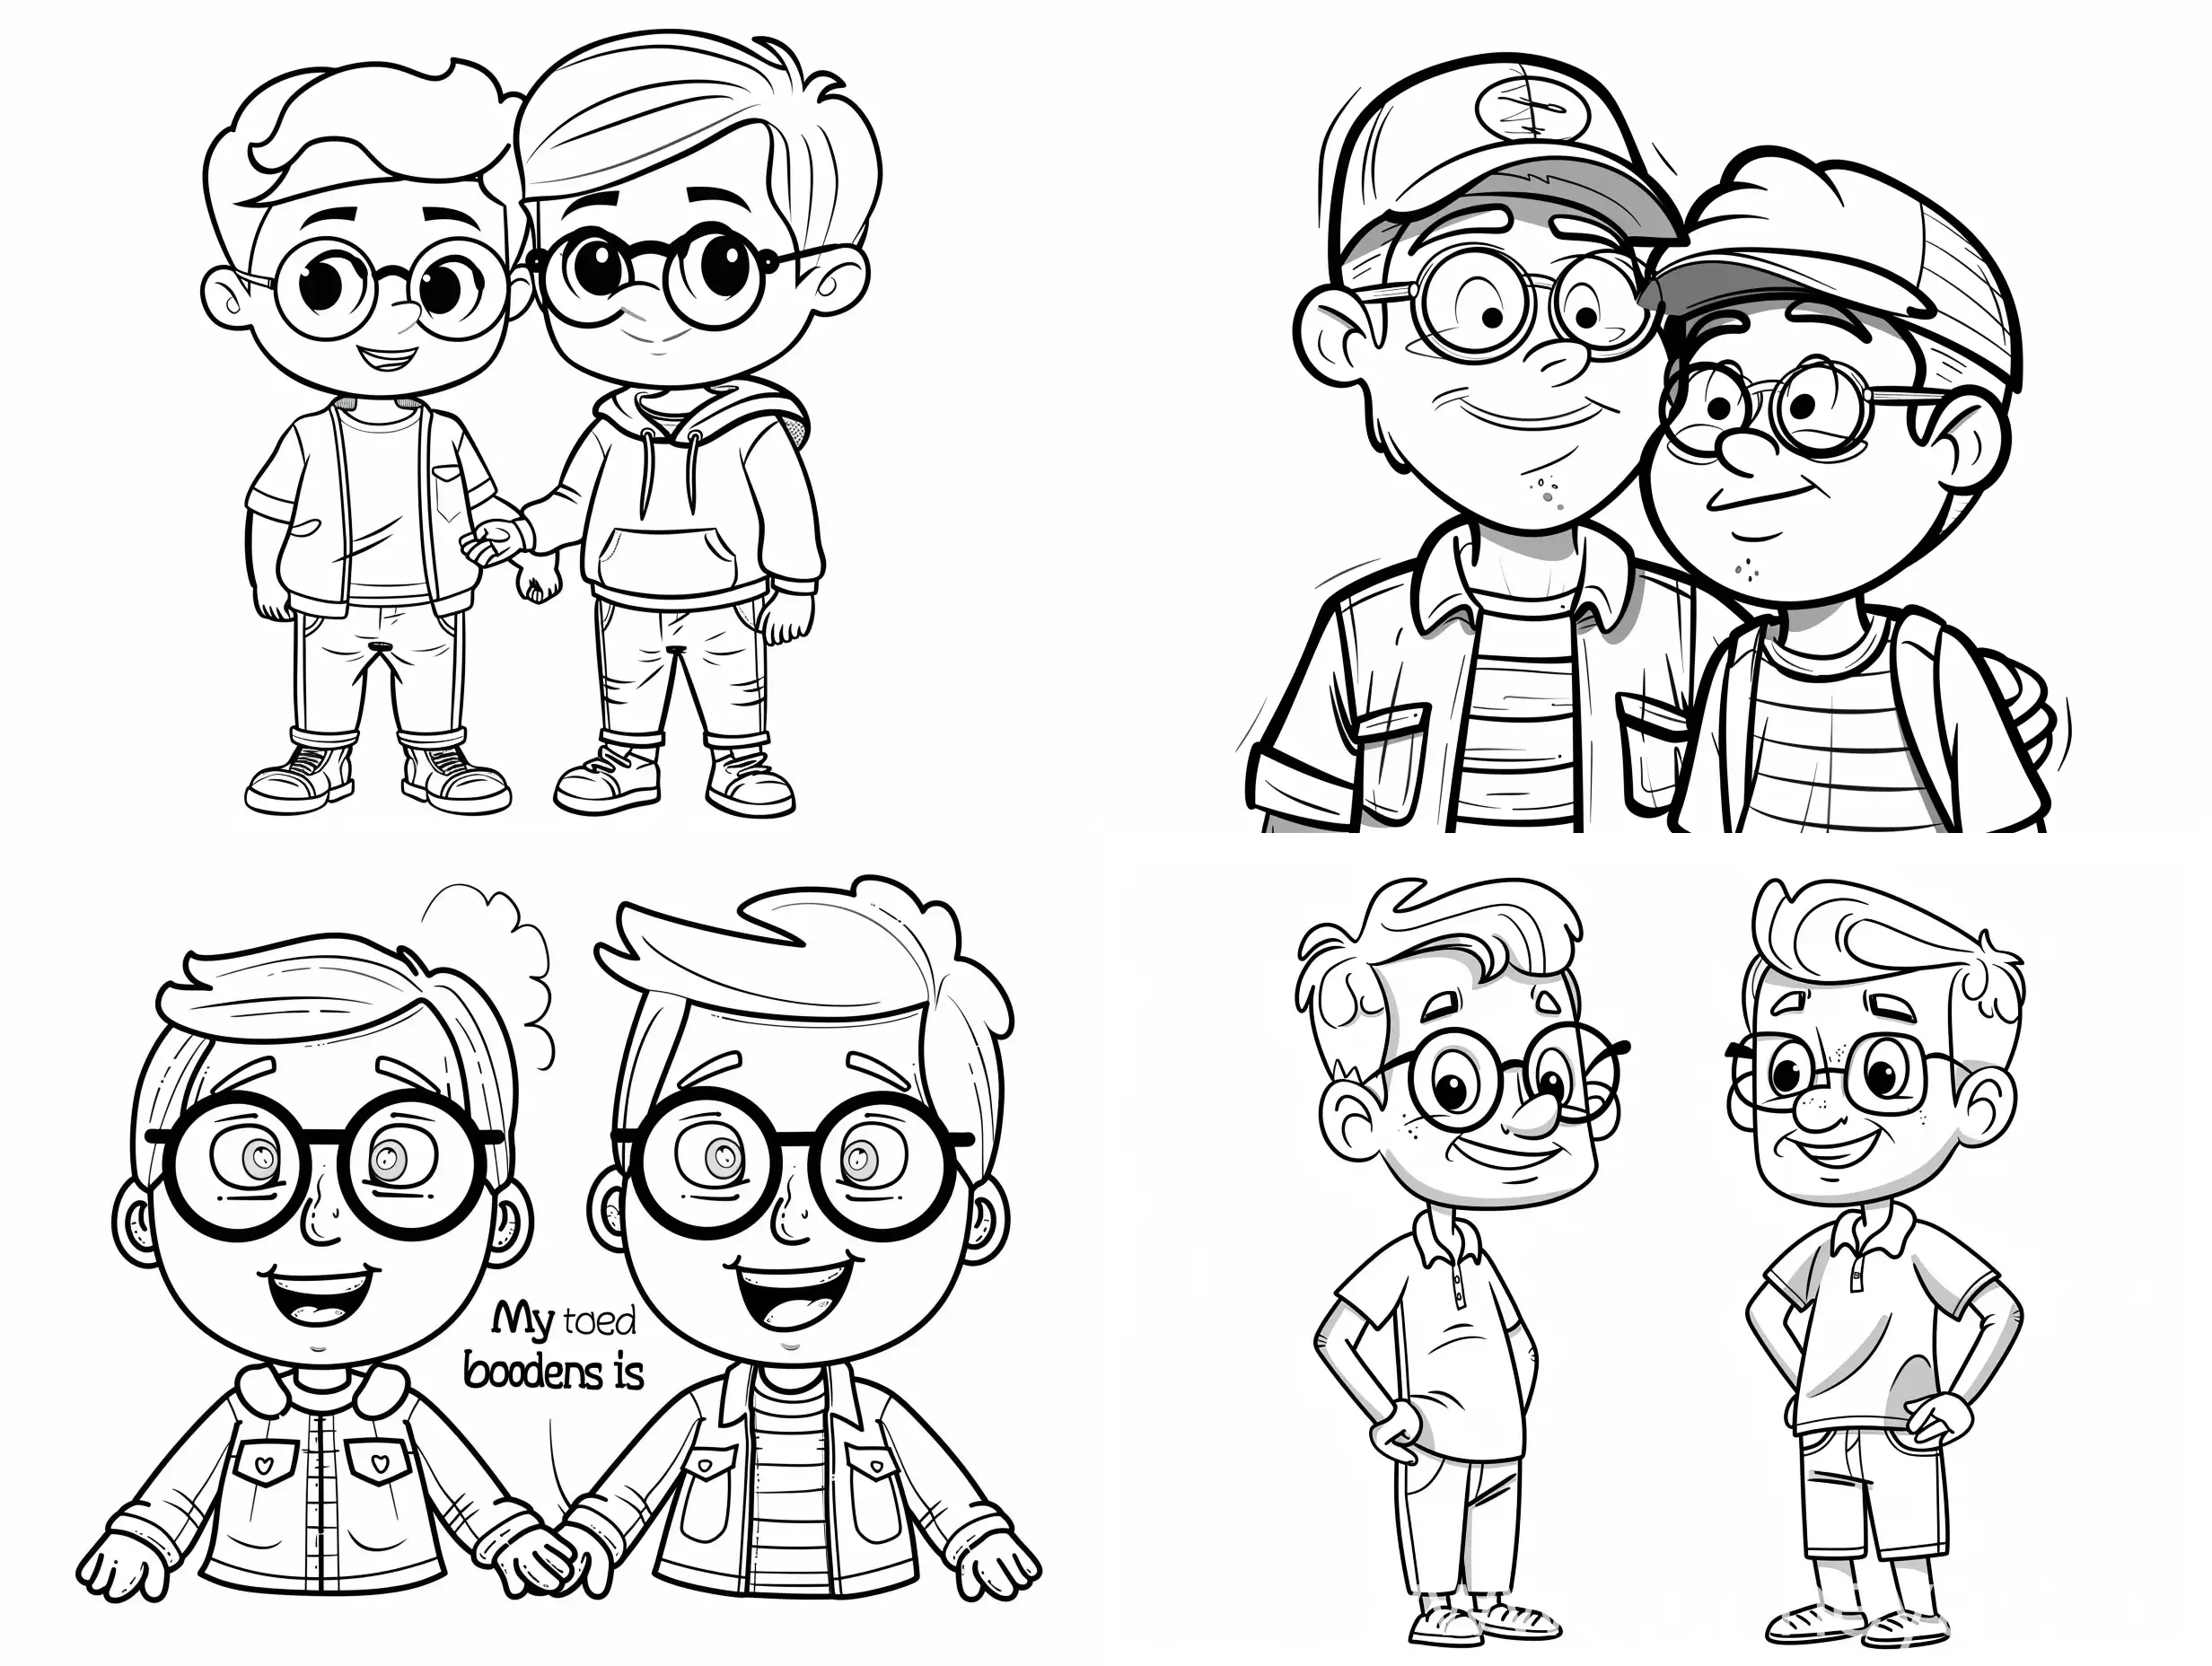 Playful-Cartoon-Coloring-Page-for-Kids-Featuring-Cool-Older-Brother